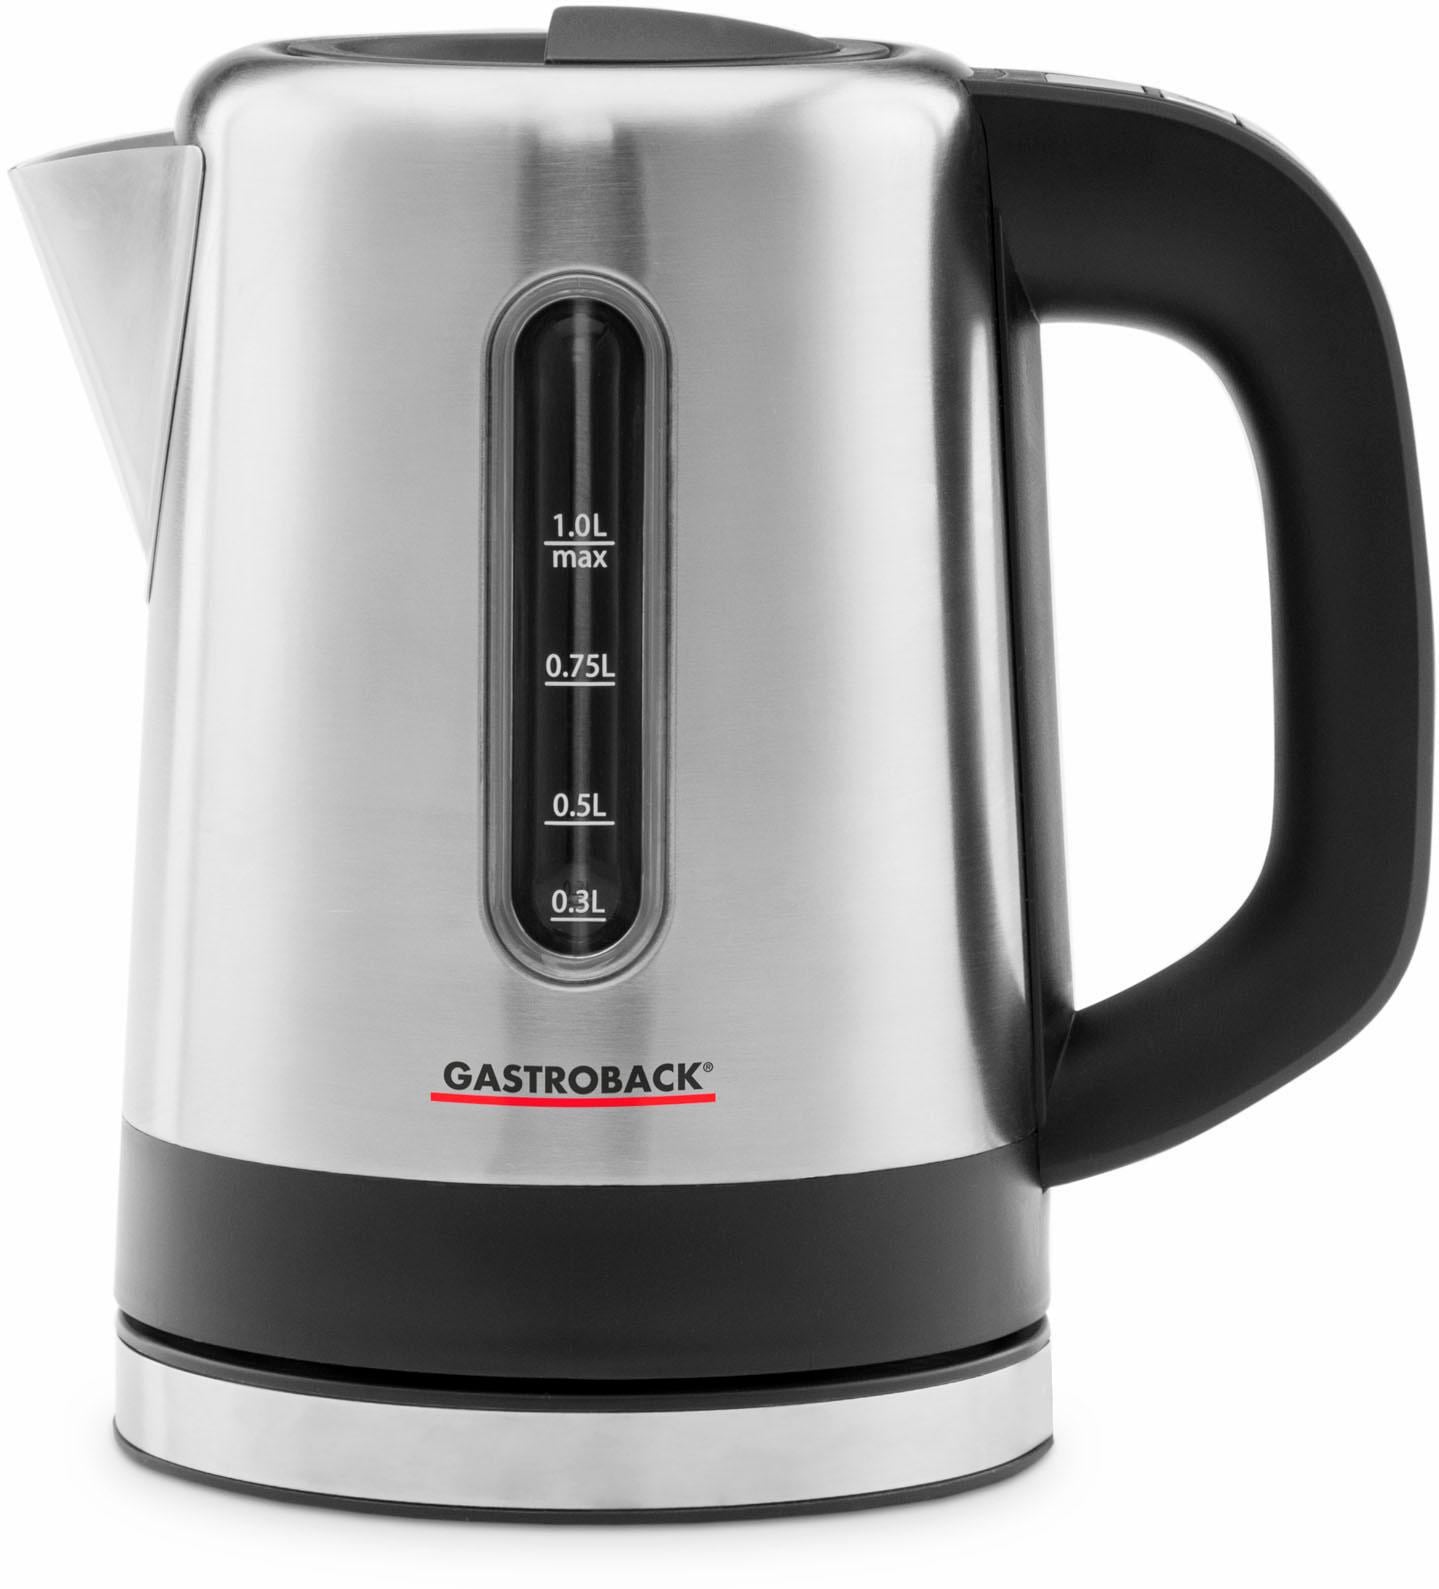 Mini 1L Stainless Steel Electric Kettle black,gray